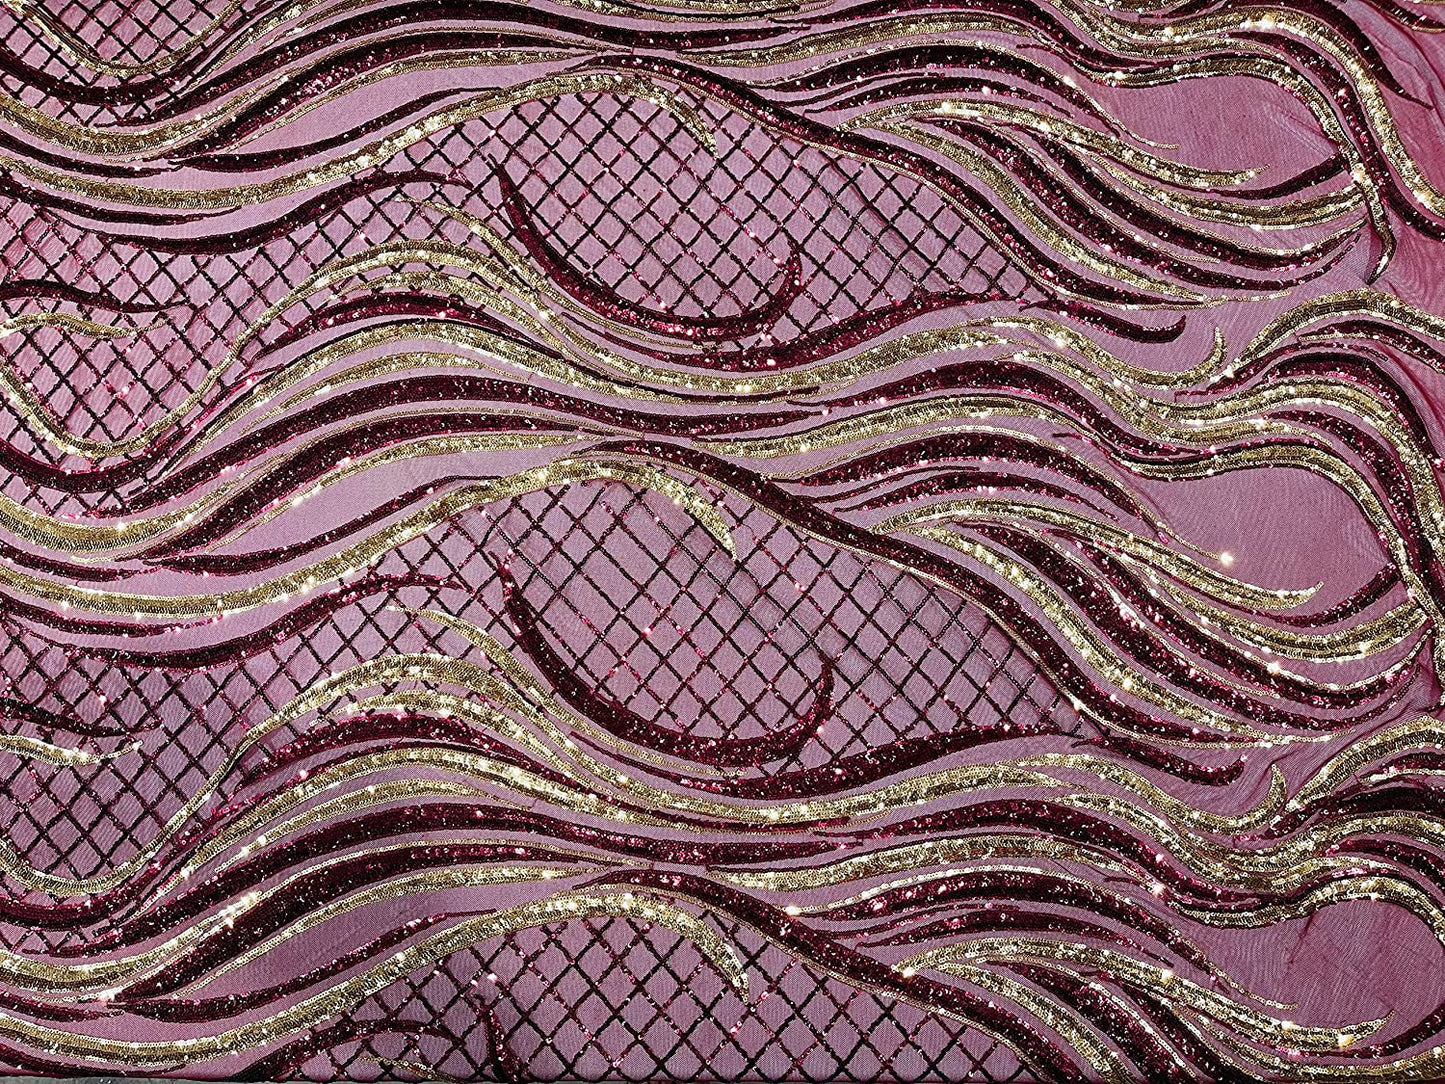 Sequin Flame Design On A 4 Way Stretch Mesh Fabric by The Yard (1 Yard, Gold/Burgundy)